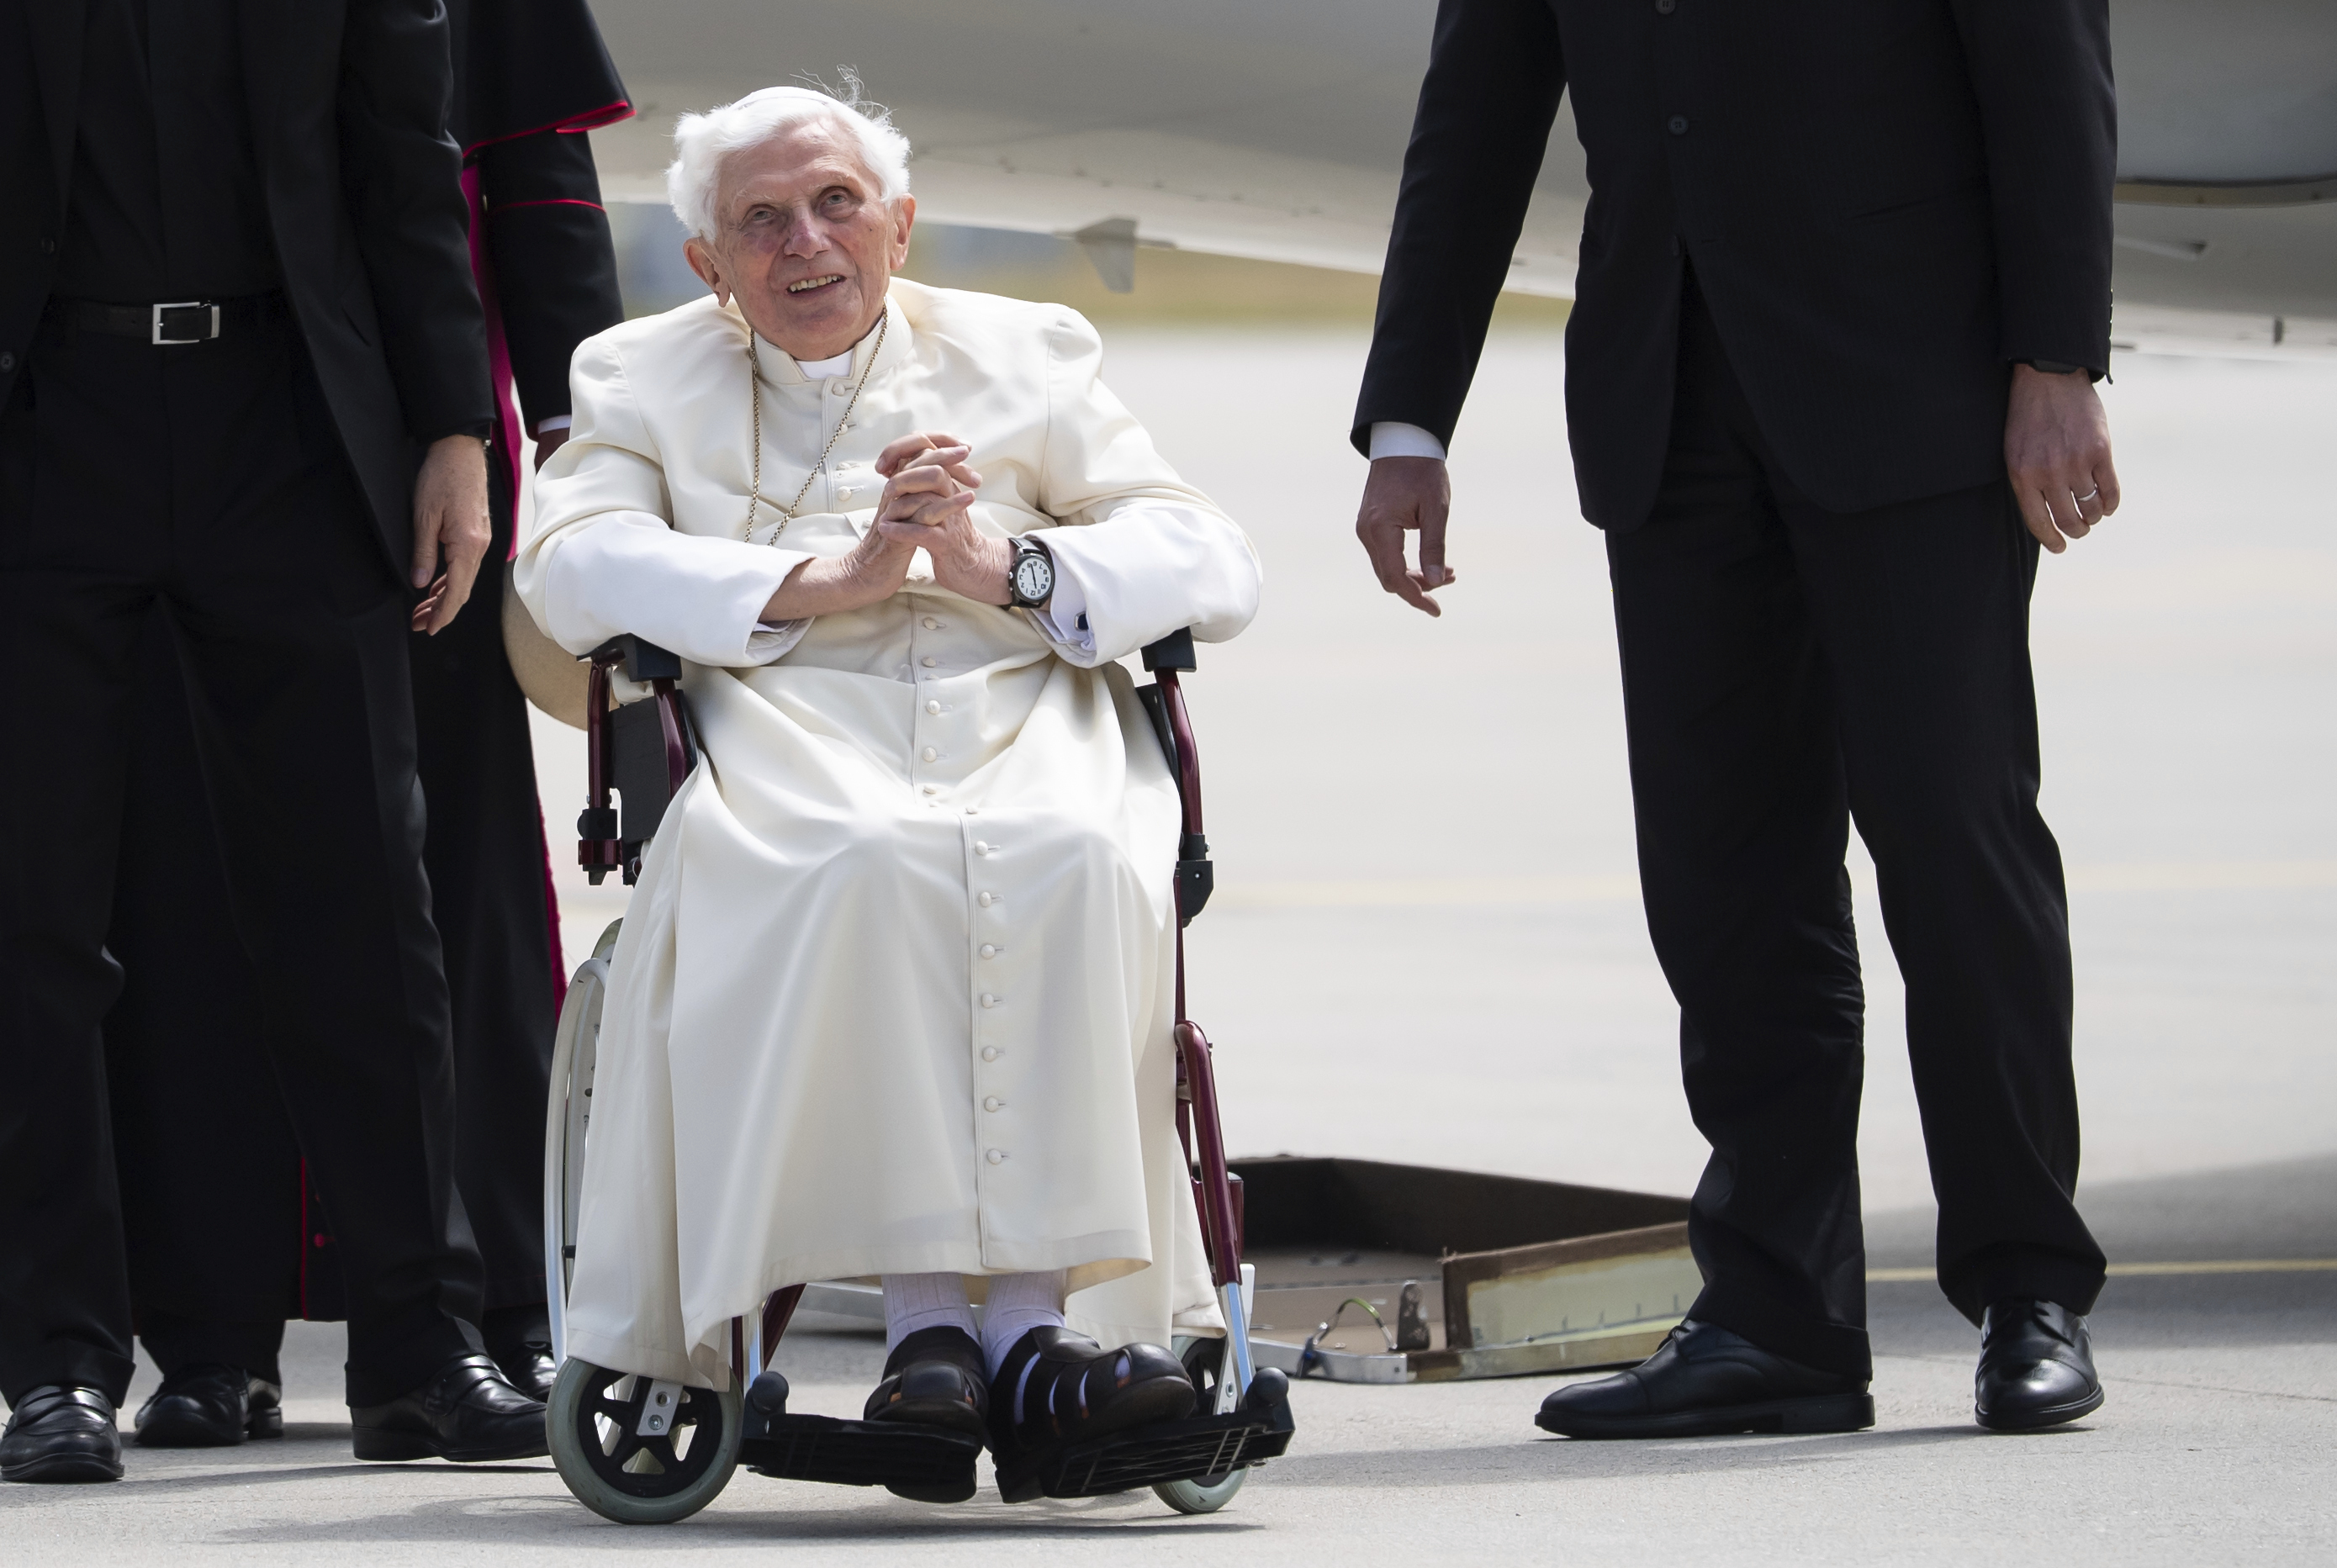 Berigelse Klinik Lyn Report: Retired Pope Benedict XVI ill after visit to Germany